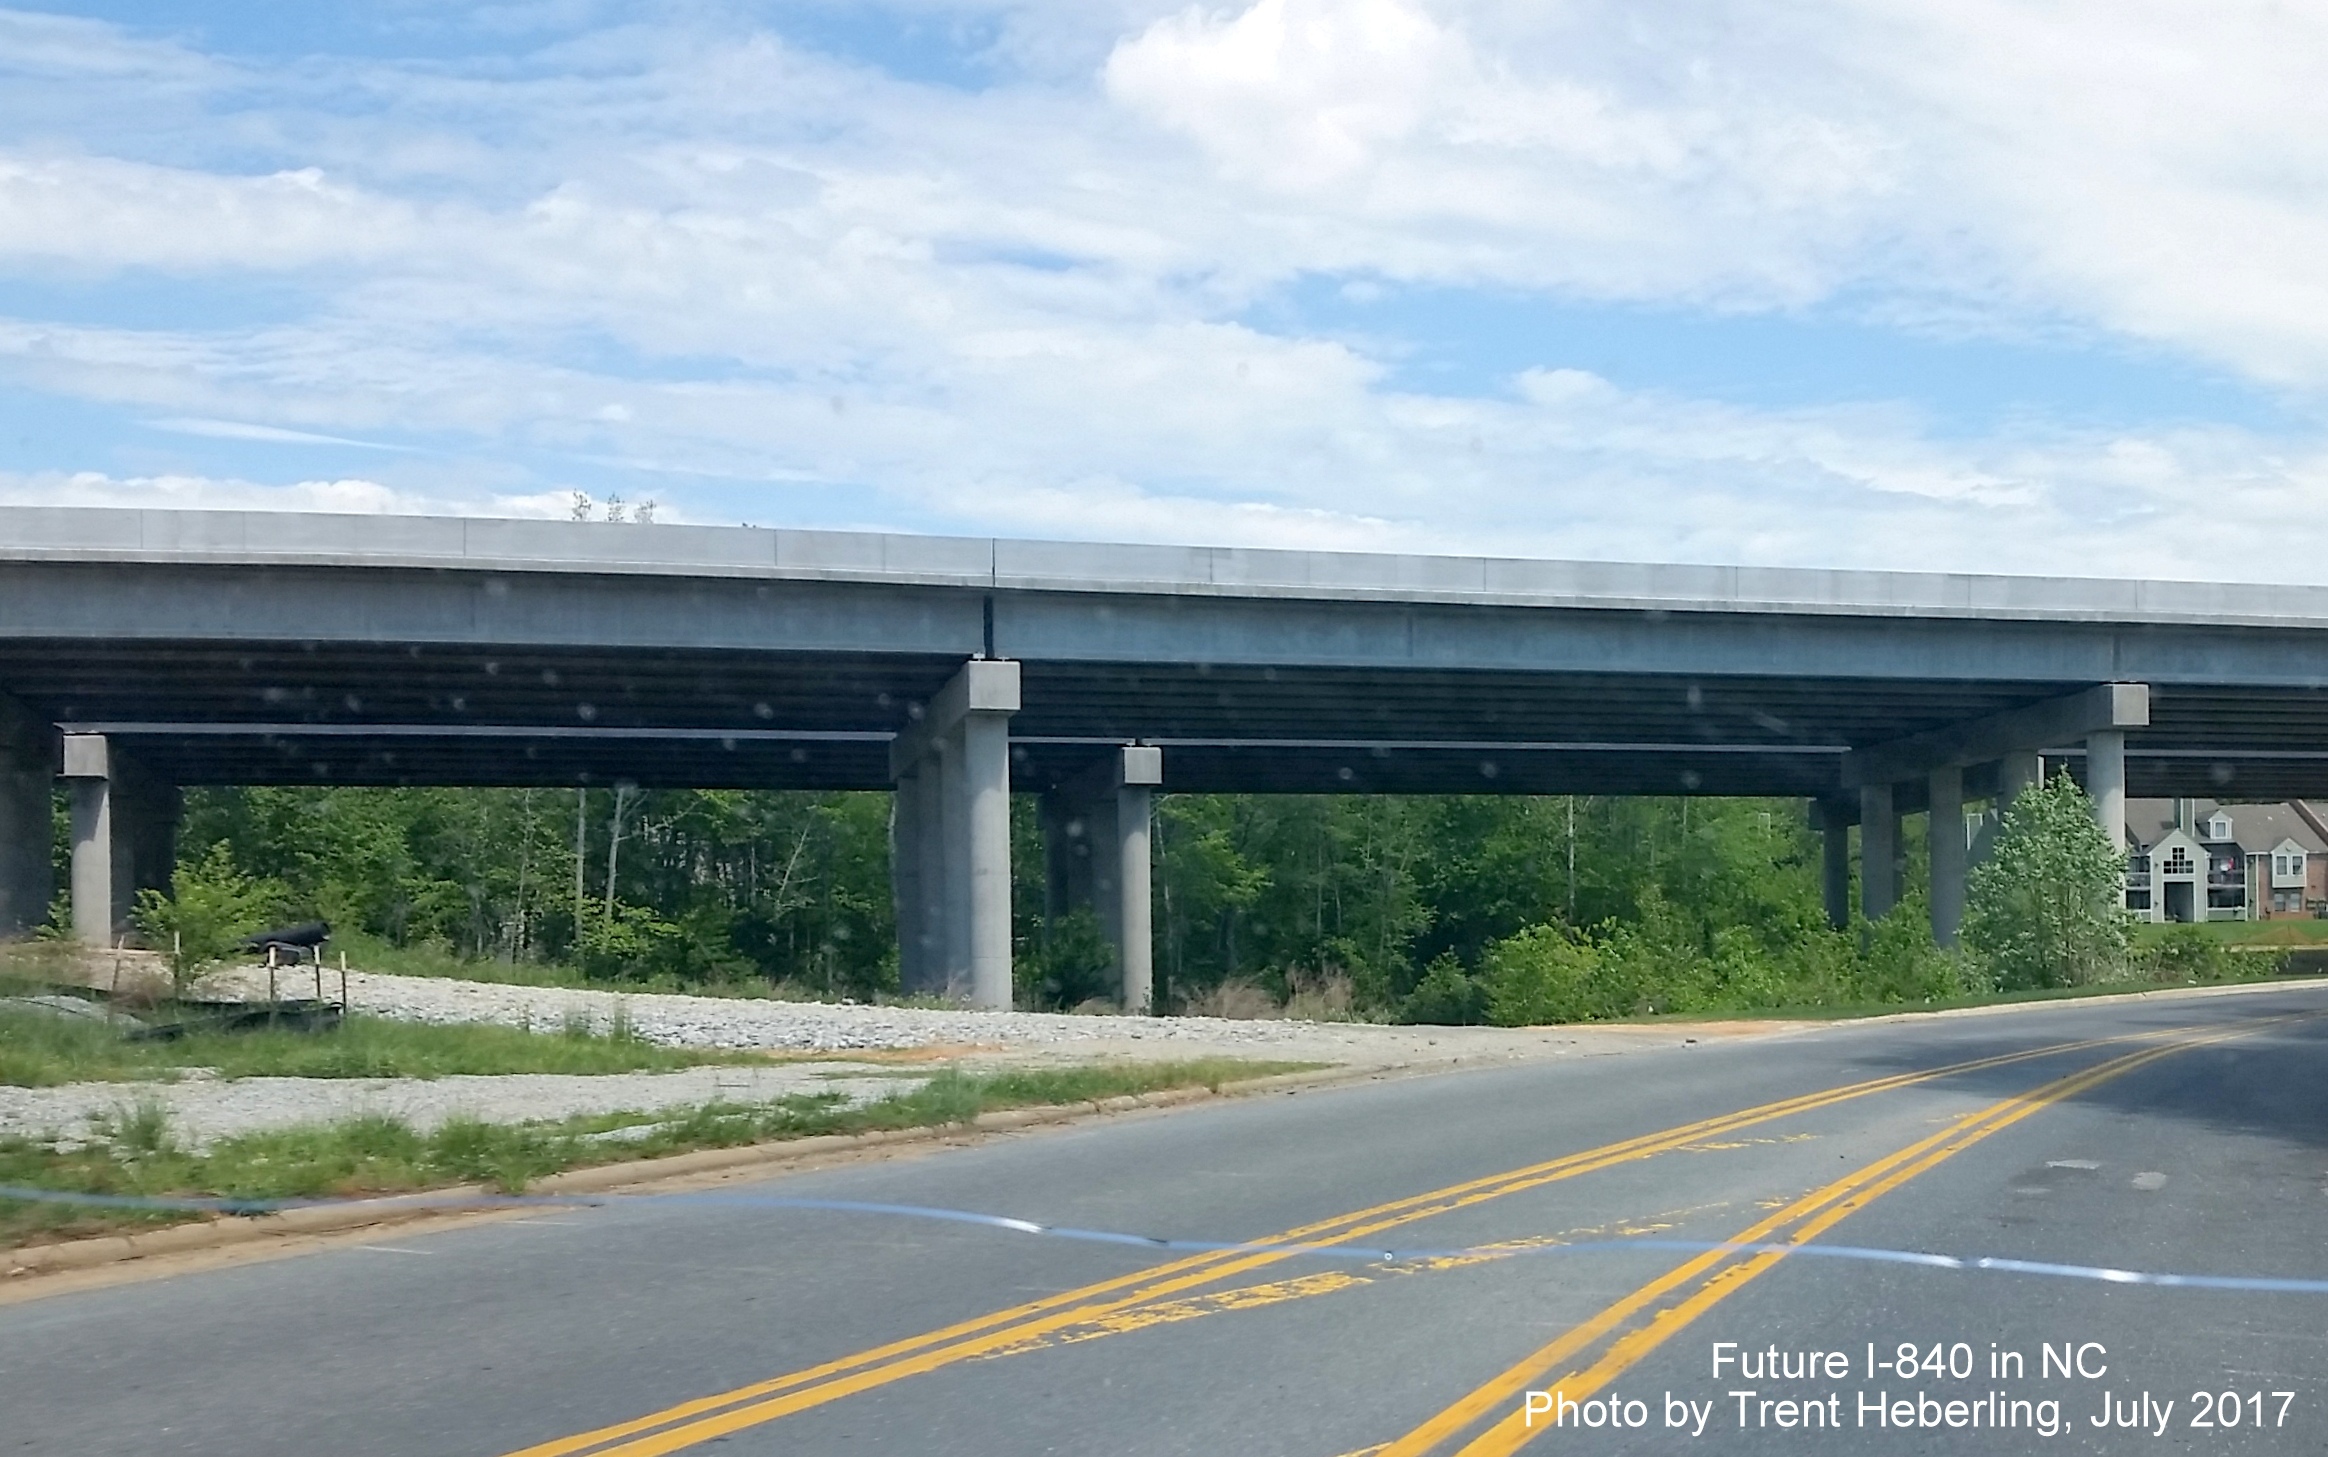 Photo of Future I-840 elevated lanes in vicinity of Darwbridge Pkwy in Greensboro, from Trent Heberling 